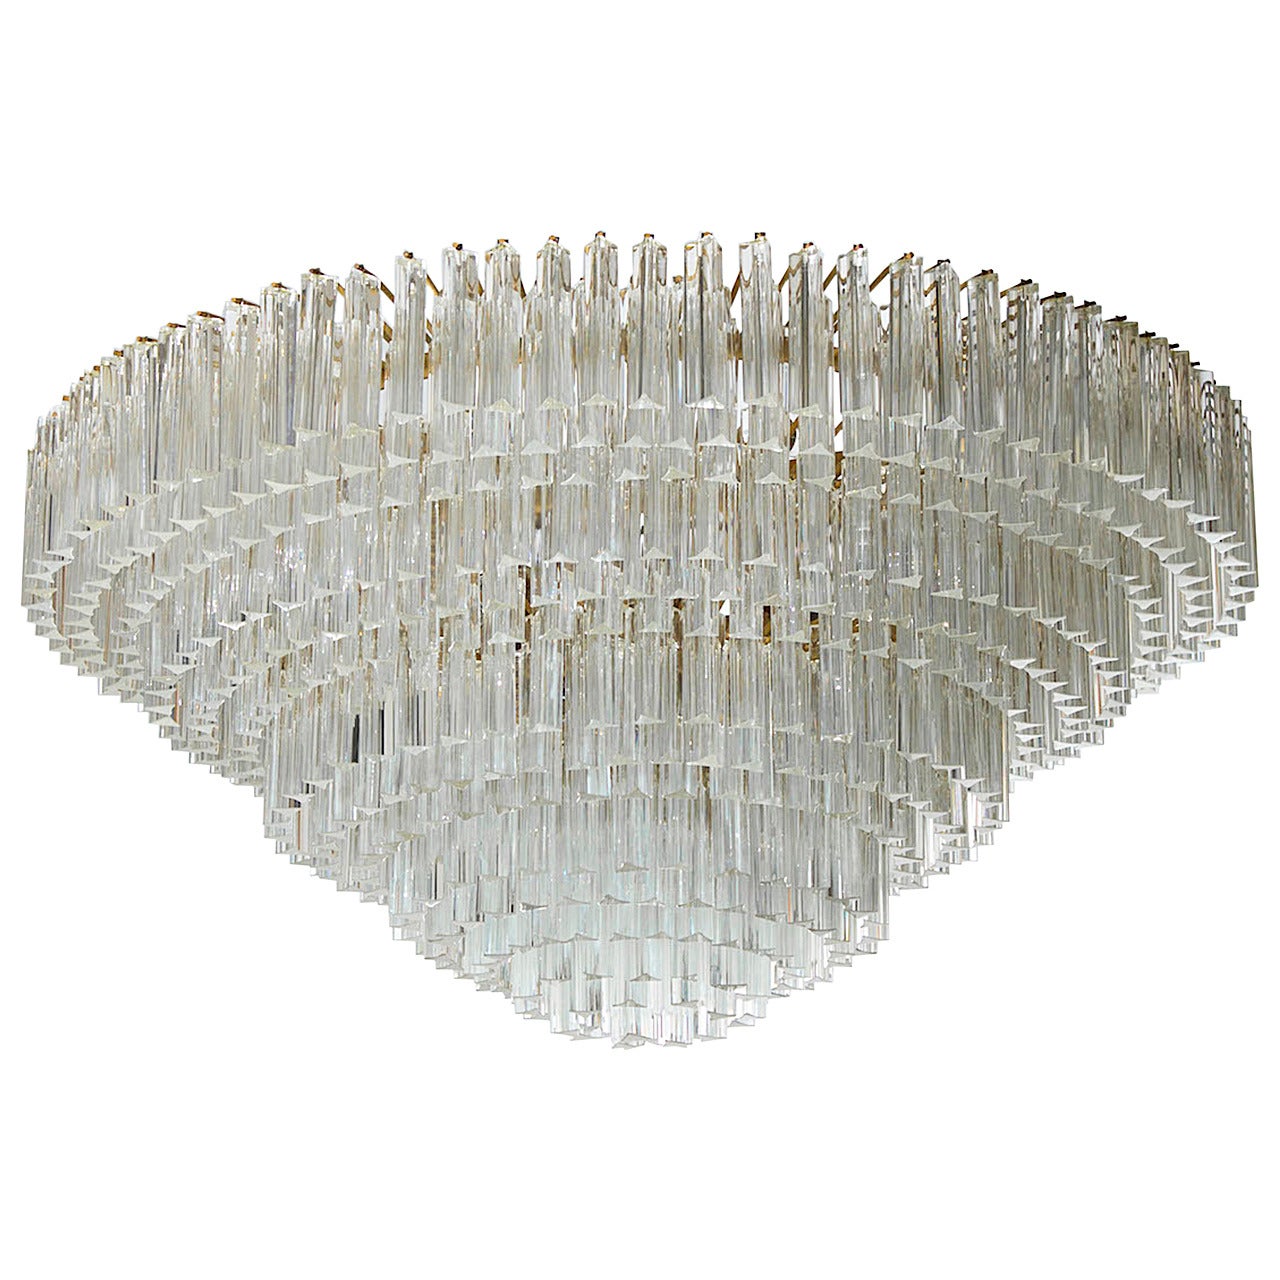 Chandelier with Triedro Elements, Attributed to Venini, circa 1970s